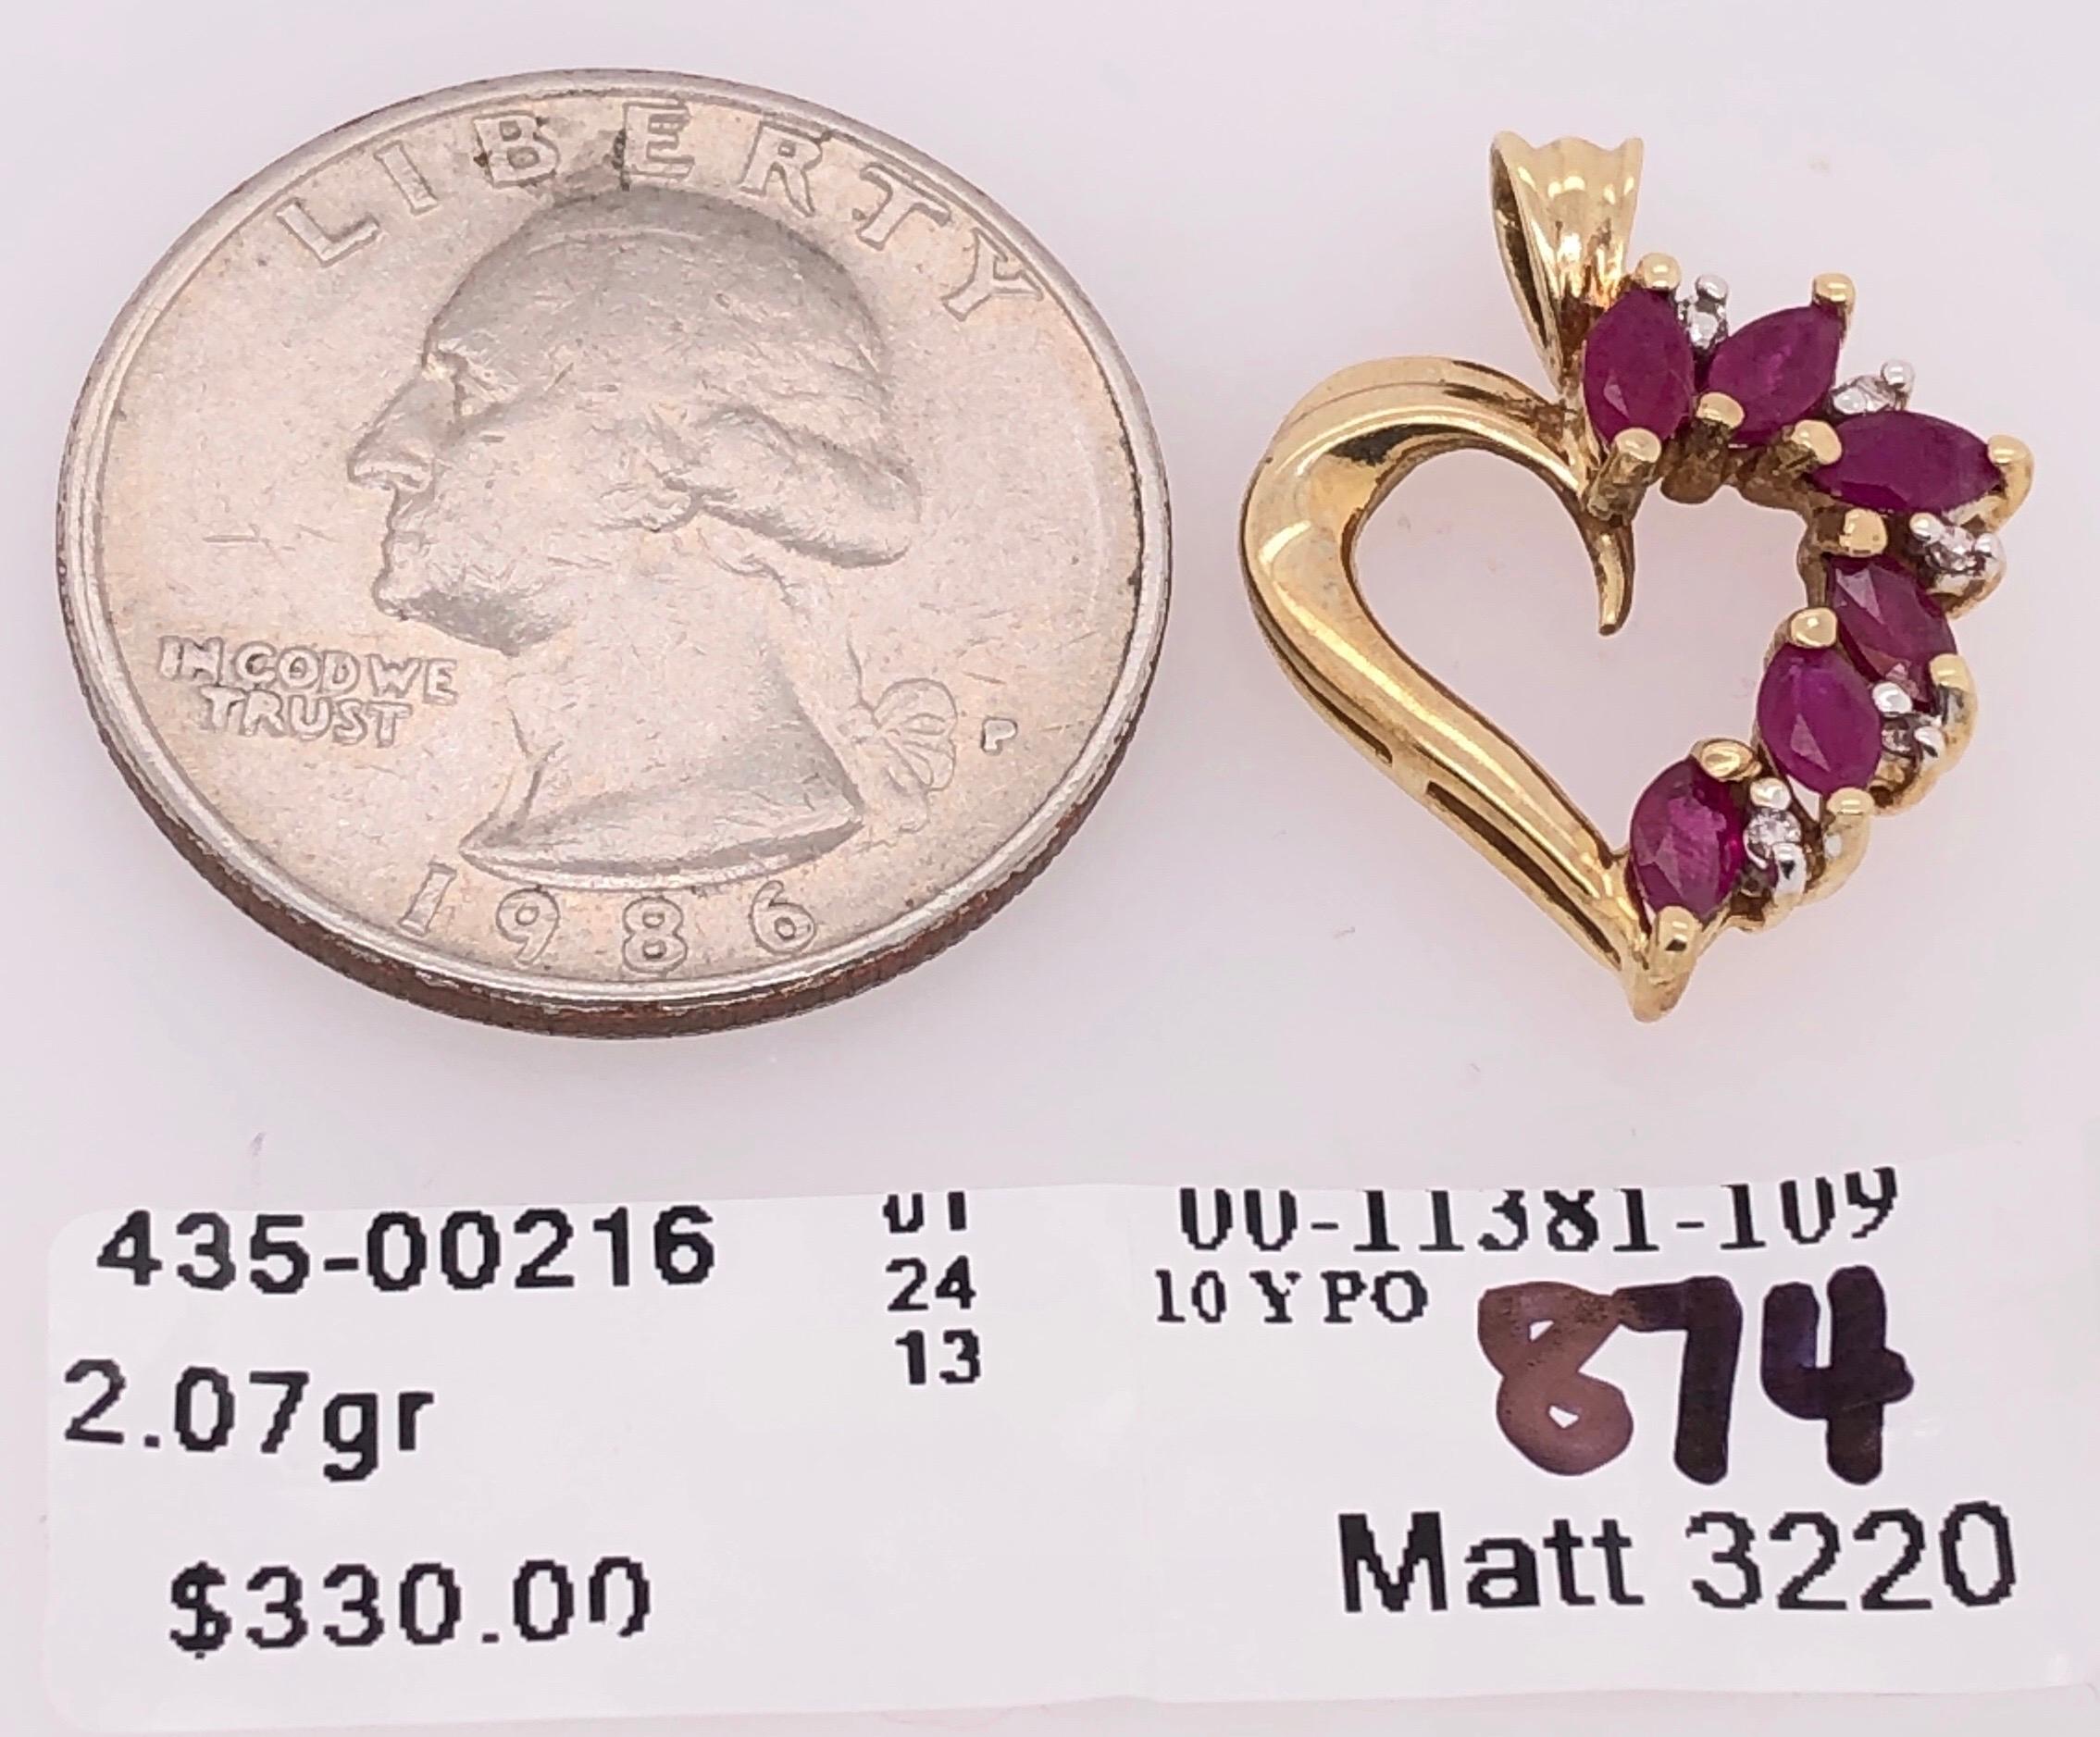 10 Karat Yellow Gold Heart Pendant with Amethyst and Diamonds 
2.07 grams total weight.